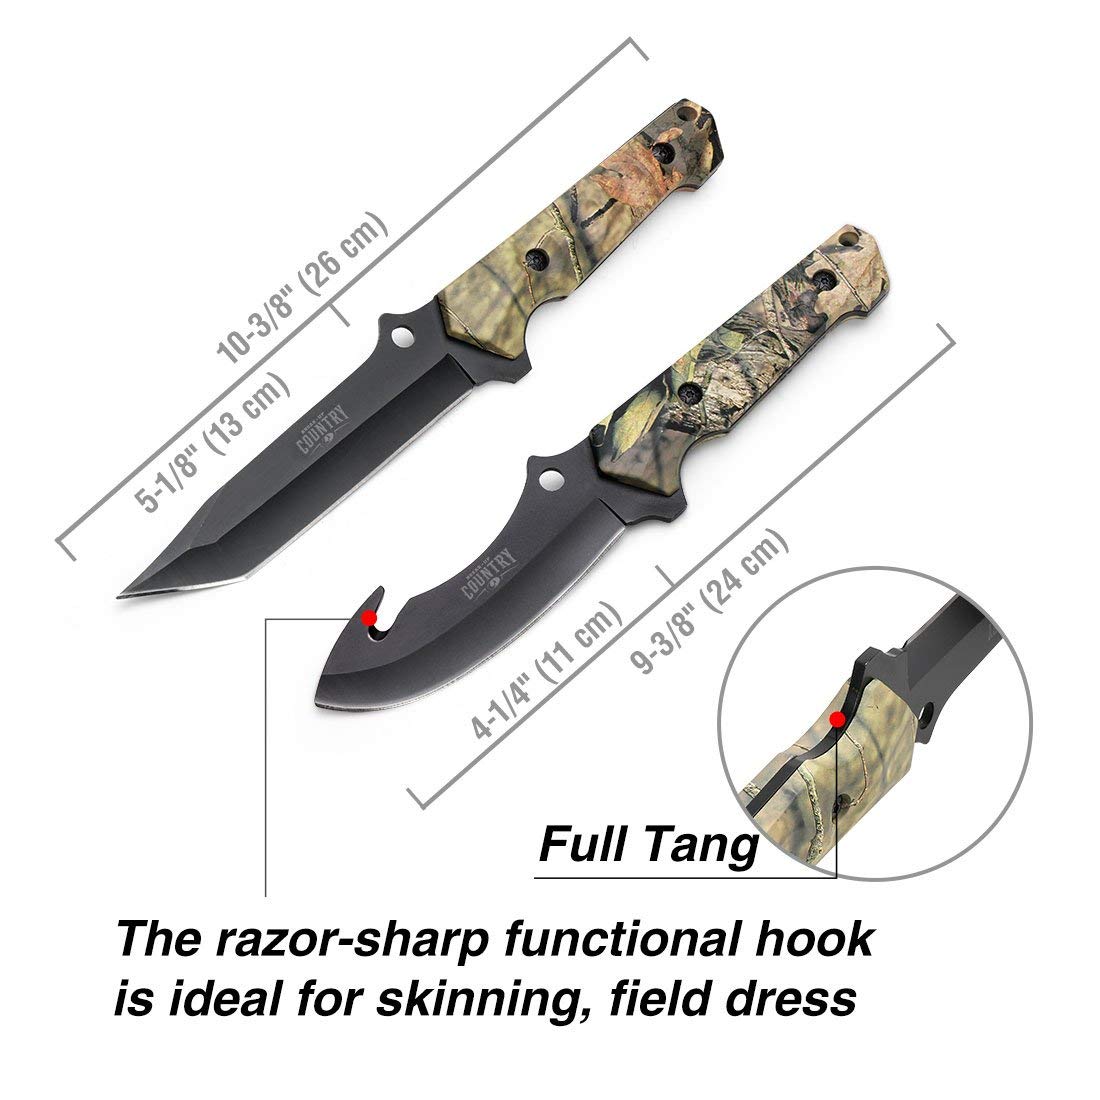 Mossy Oak Fixed Blade Hunting Knife Set - 2 Piece, Full Tang Handle Straight Edge and Gut Hook Blades Game Processing Knife, Sheath Included